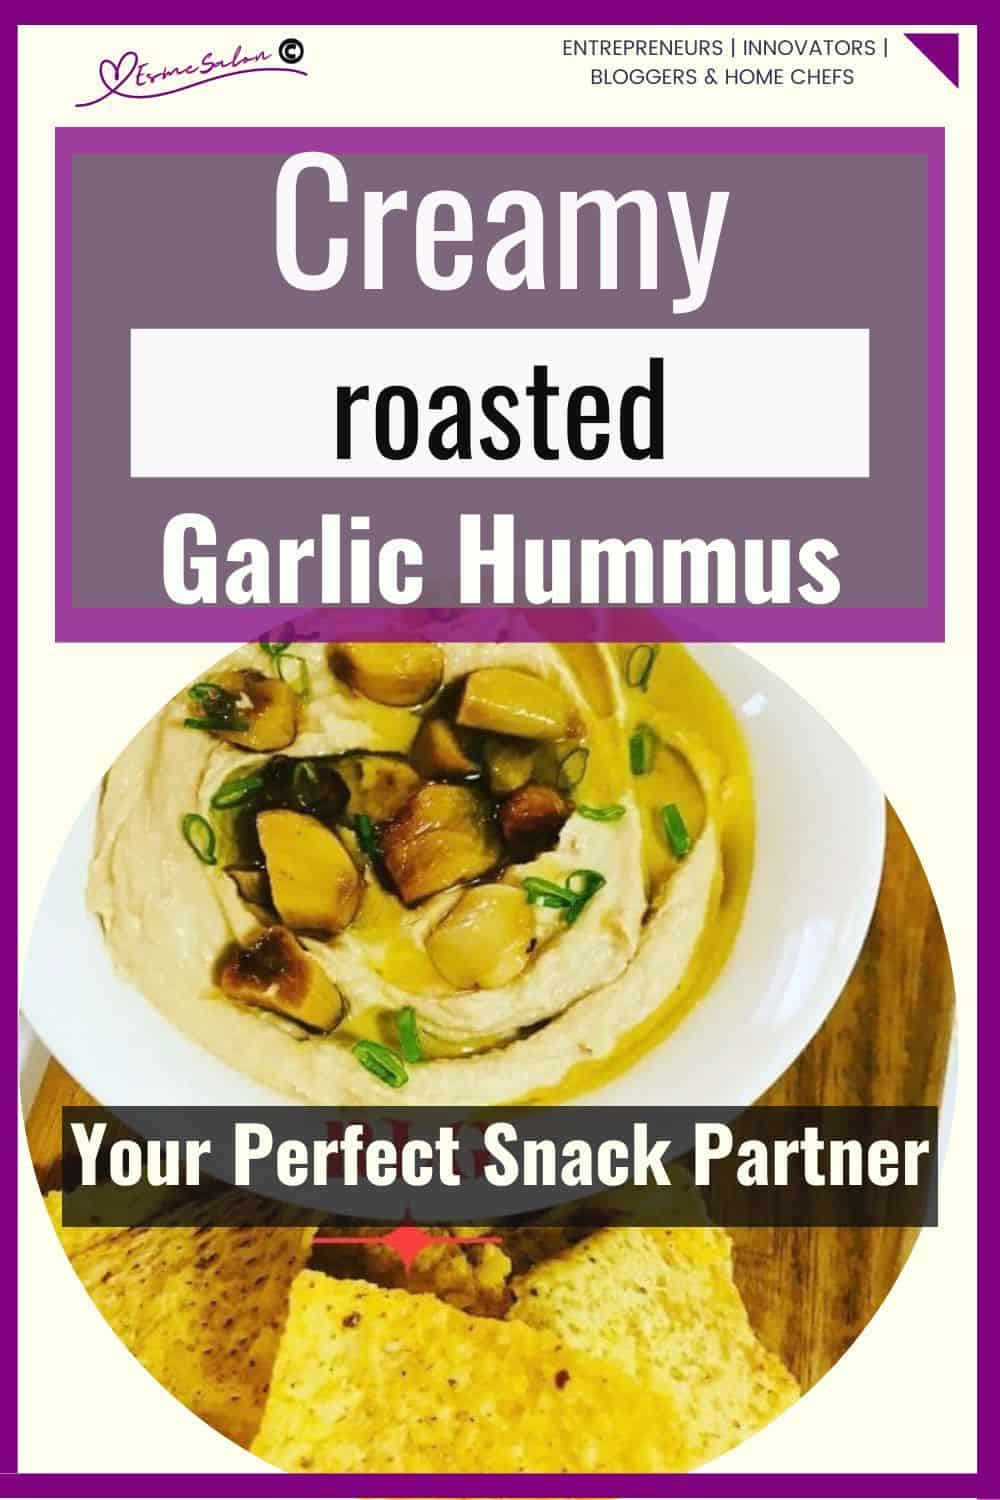 an image of a white bowl filled with Creamy Garlic Roasted Hummus on wooden table with some crisps as well